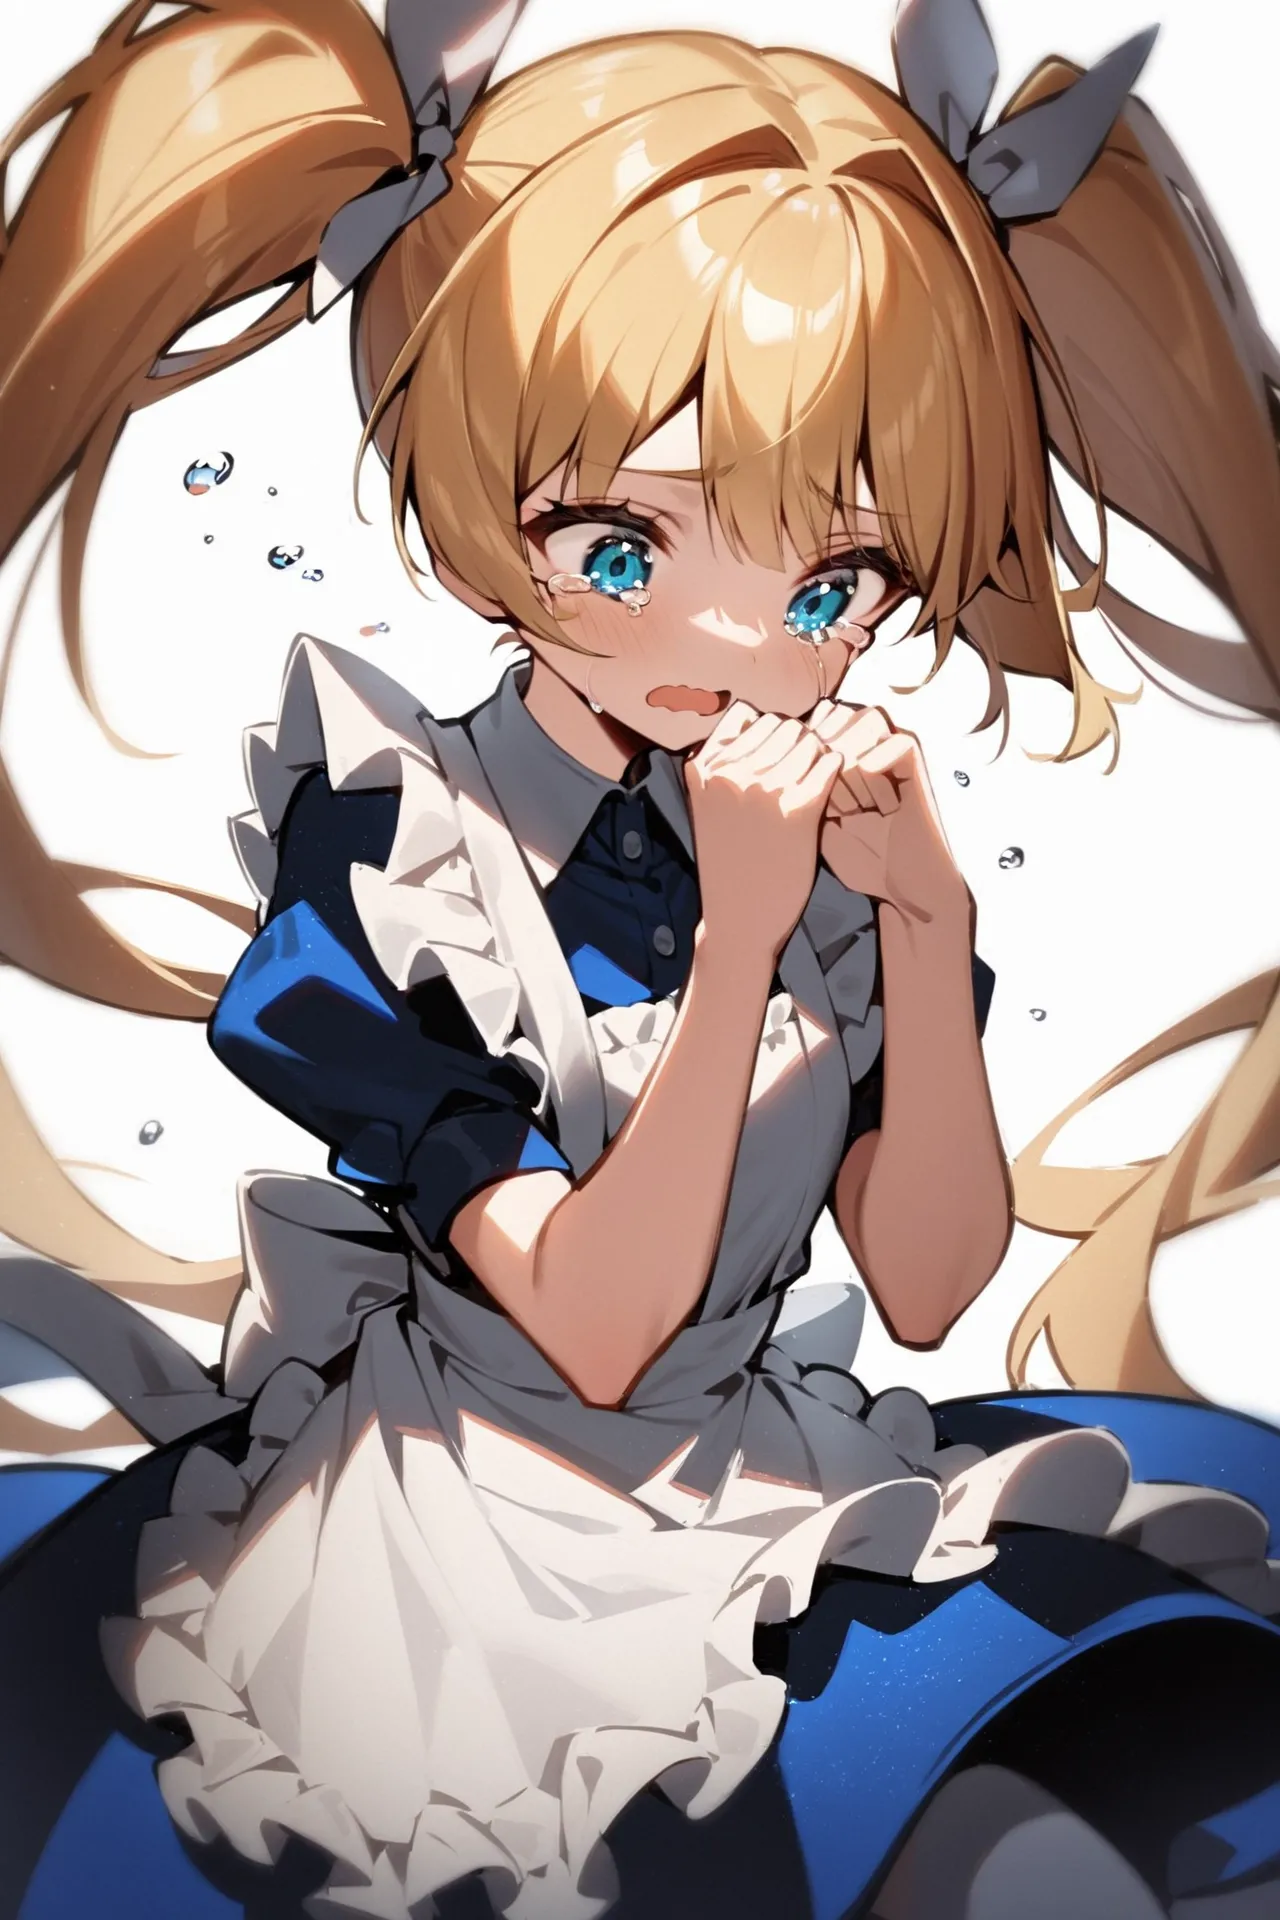 '1girl, streaming tears,\nblonde hair, twintails, blue dress, white apron,\nwhite background,\nAlice in glitterworld\nNegative prompt: (worst quality, low quality:1.4), nsfw\nSteps: 35, Sampler: DPM++ 2M SDE Karras, CFG scale: 7, Seed: 1, Size: 640x960, Model hash: 642b08ca49, Model: ConfusionXL2.0_fp16_vae, VAE hash: 63aeecb90f, VAE: sdxl_vae_0.9.safetensors, Denoising strength: 0.6, Clip skip: 2, Hires upscale: 2, Hires steps: 15, Hires upscaler: ESRGAN_4x, Eta: 0.68, Version: v1.7.0'